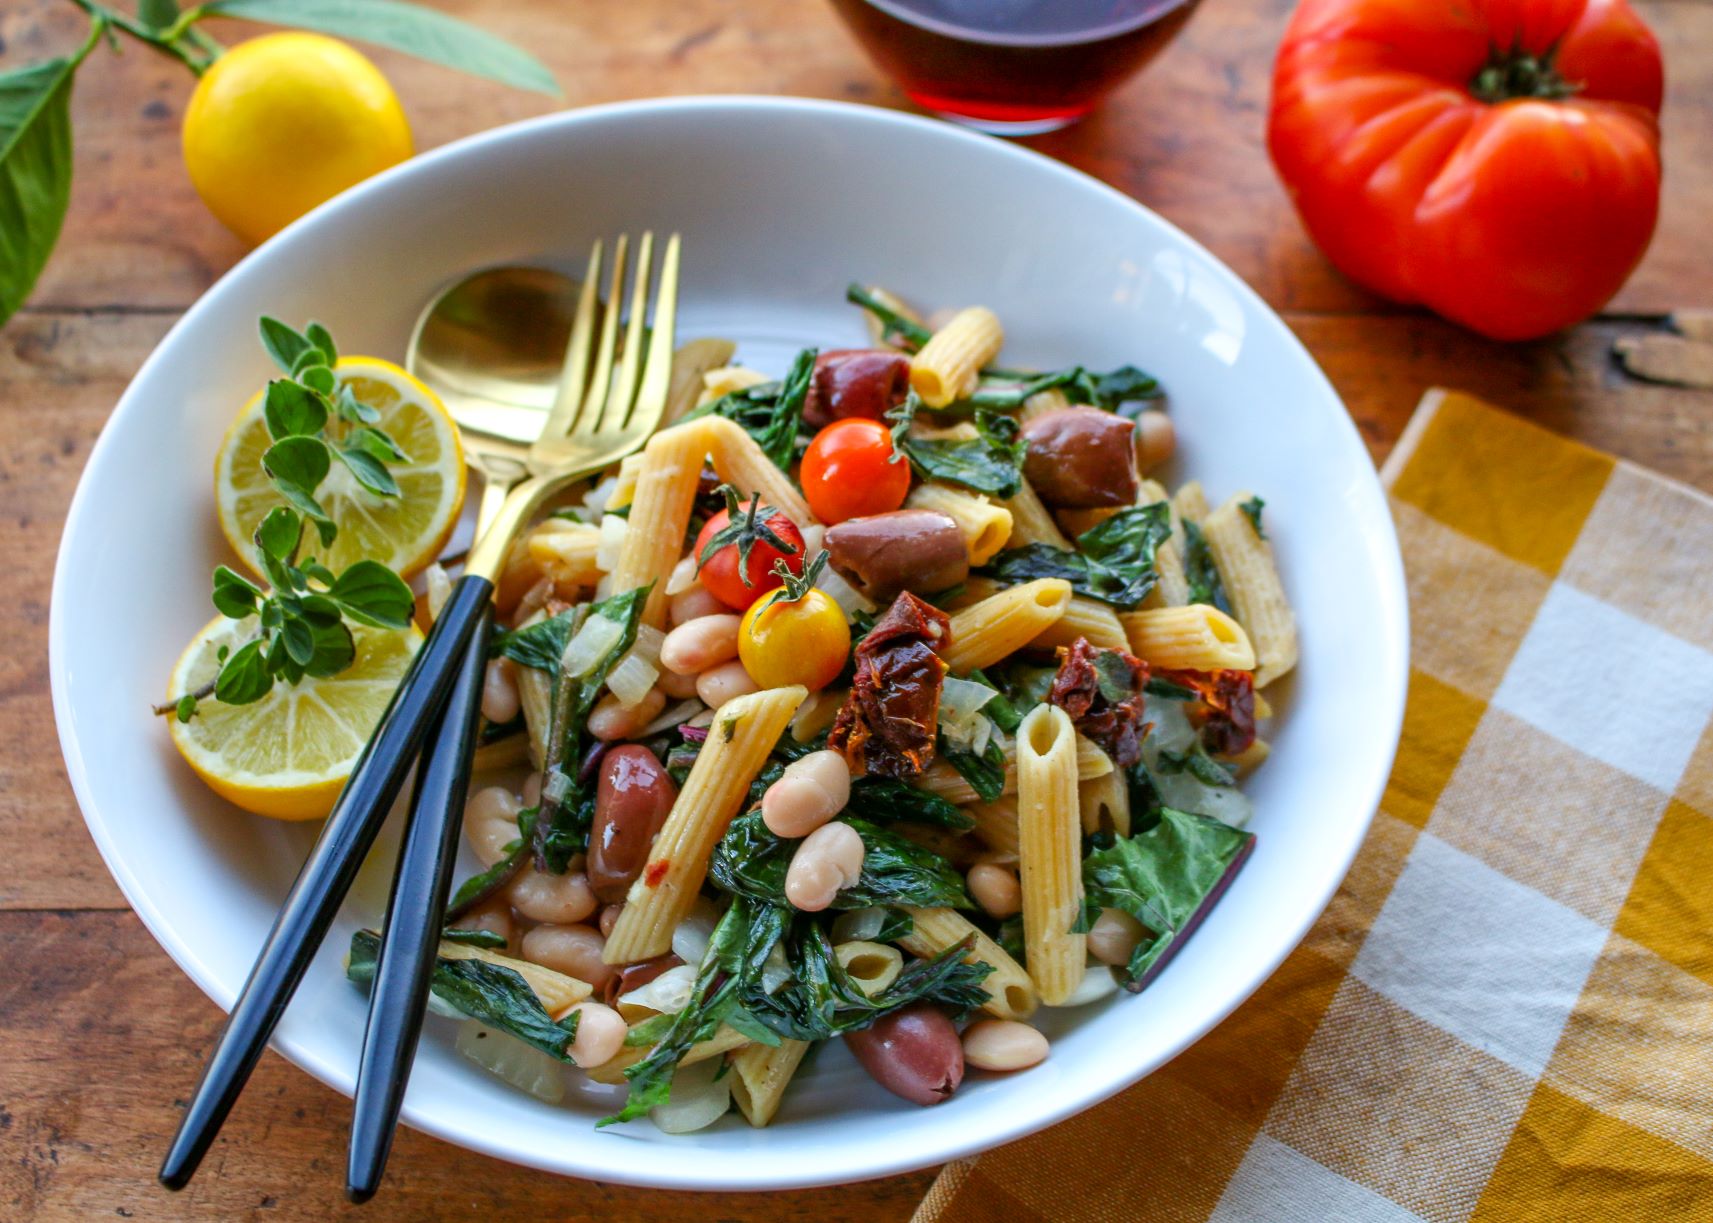 Penne with White Beans and Greens